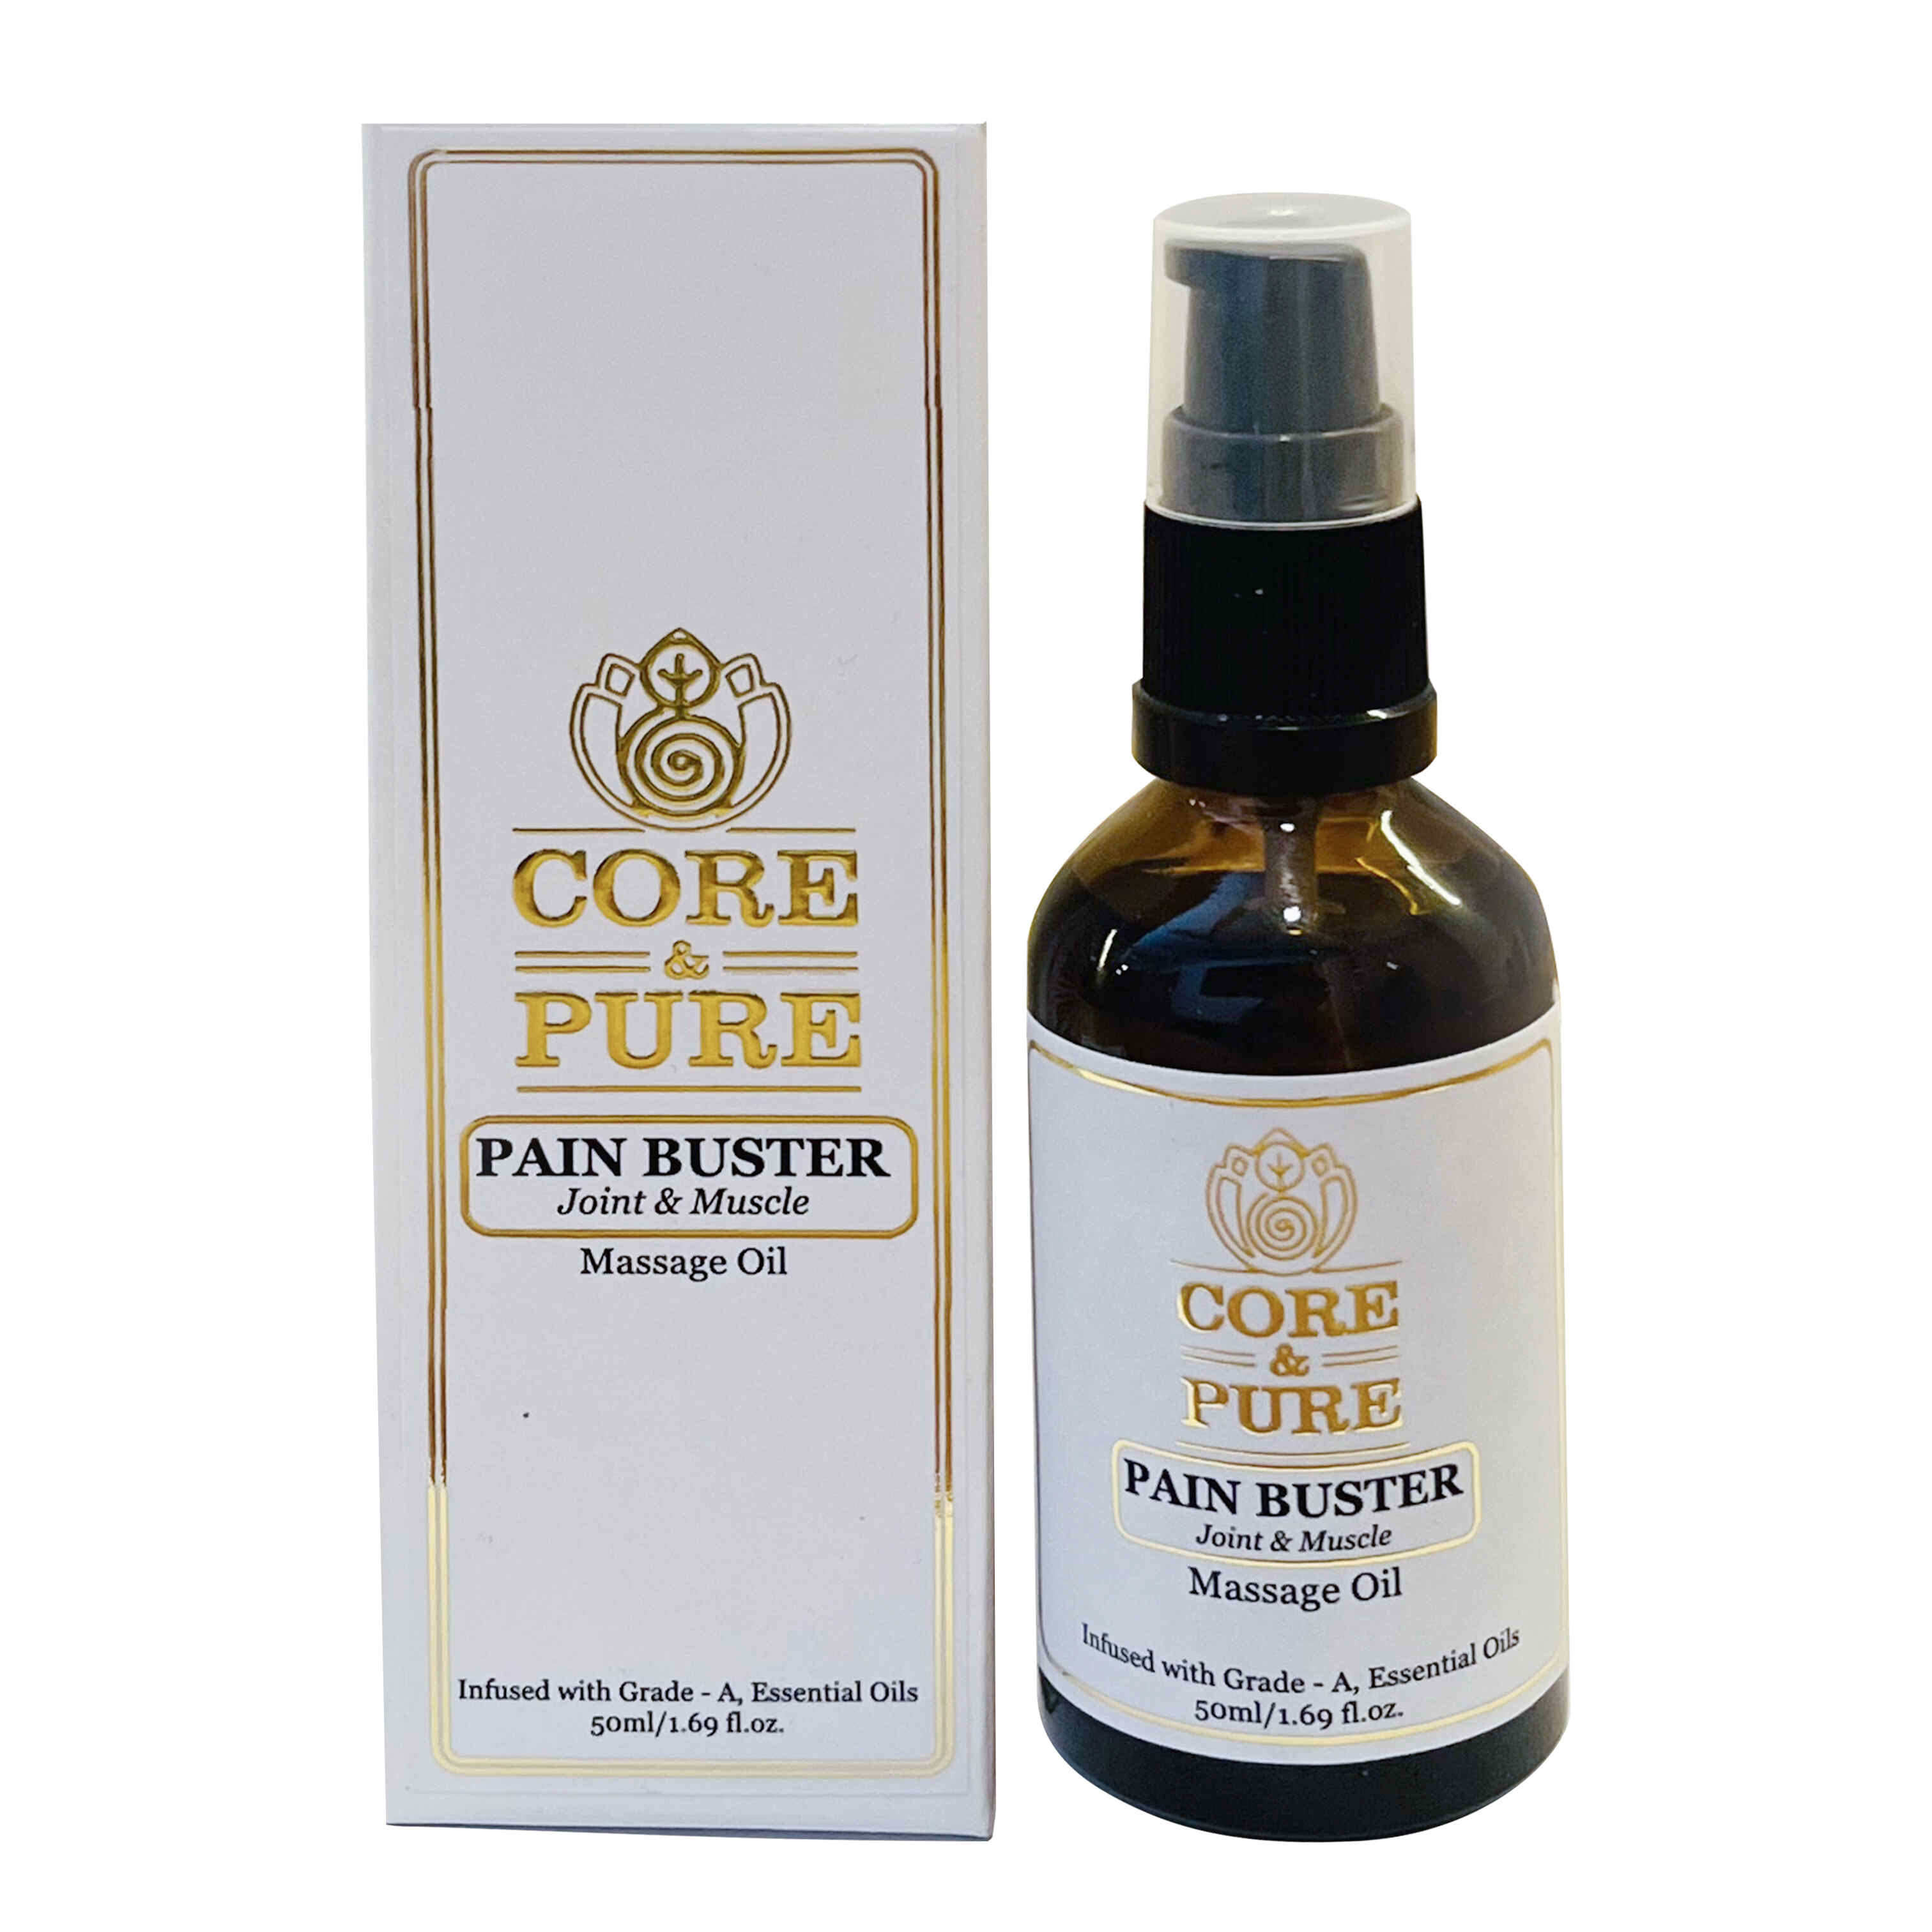 PAIN BUSTER Massage Oil